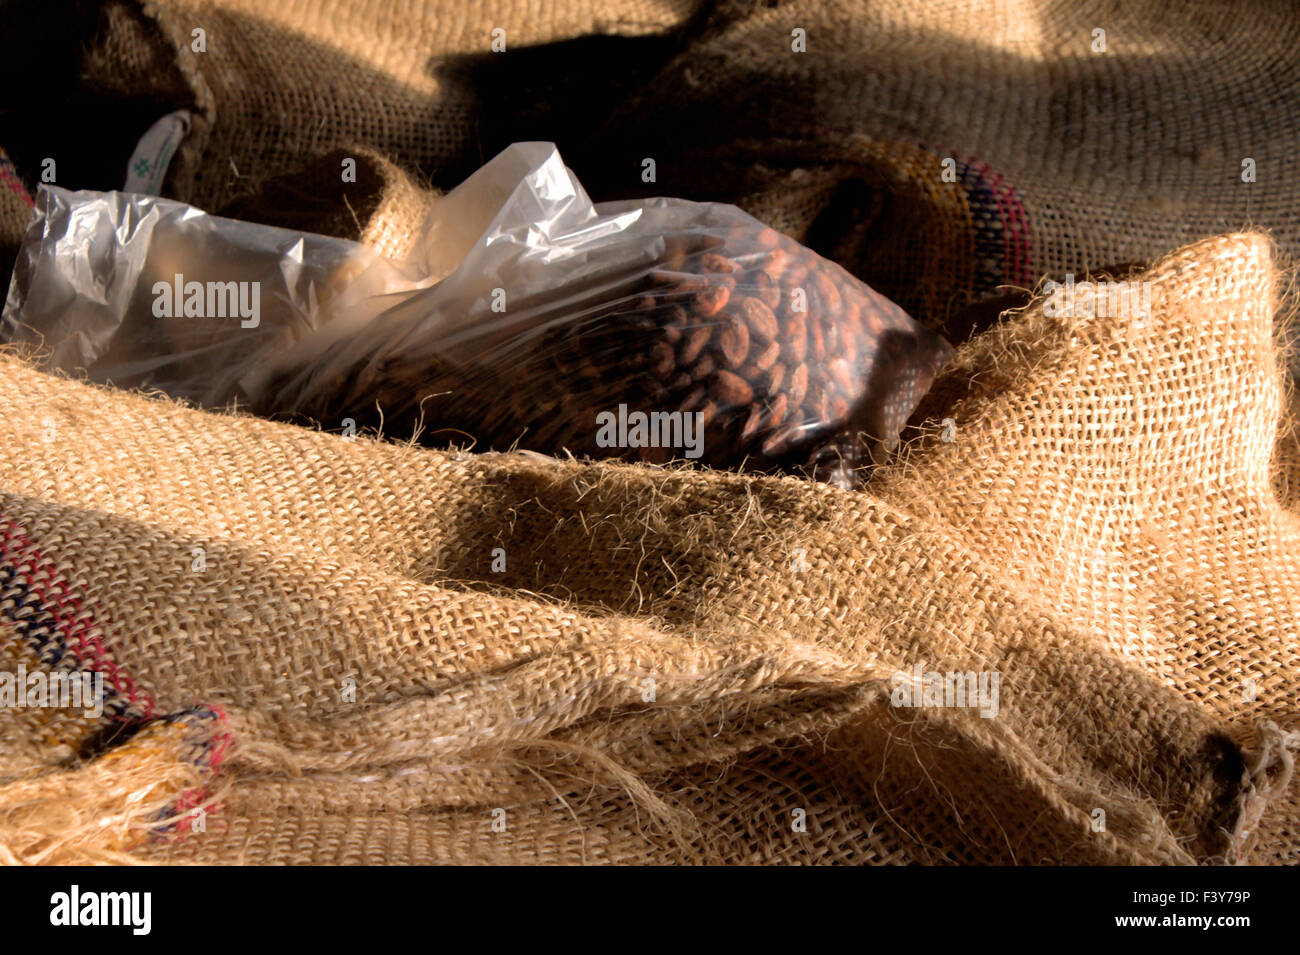 cacao-beans in plastic-bag on hessian-sacks Stock Photo